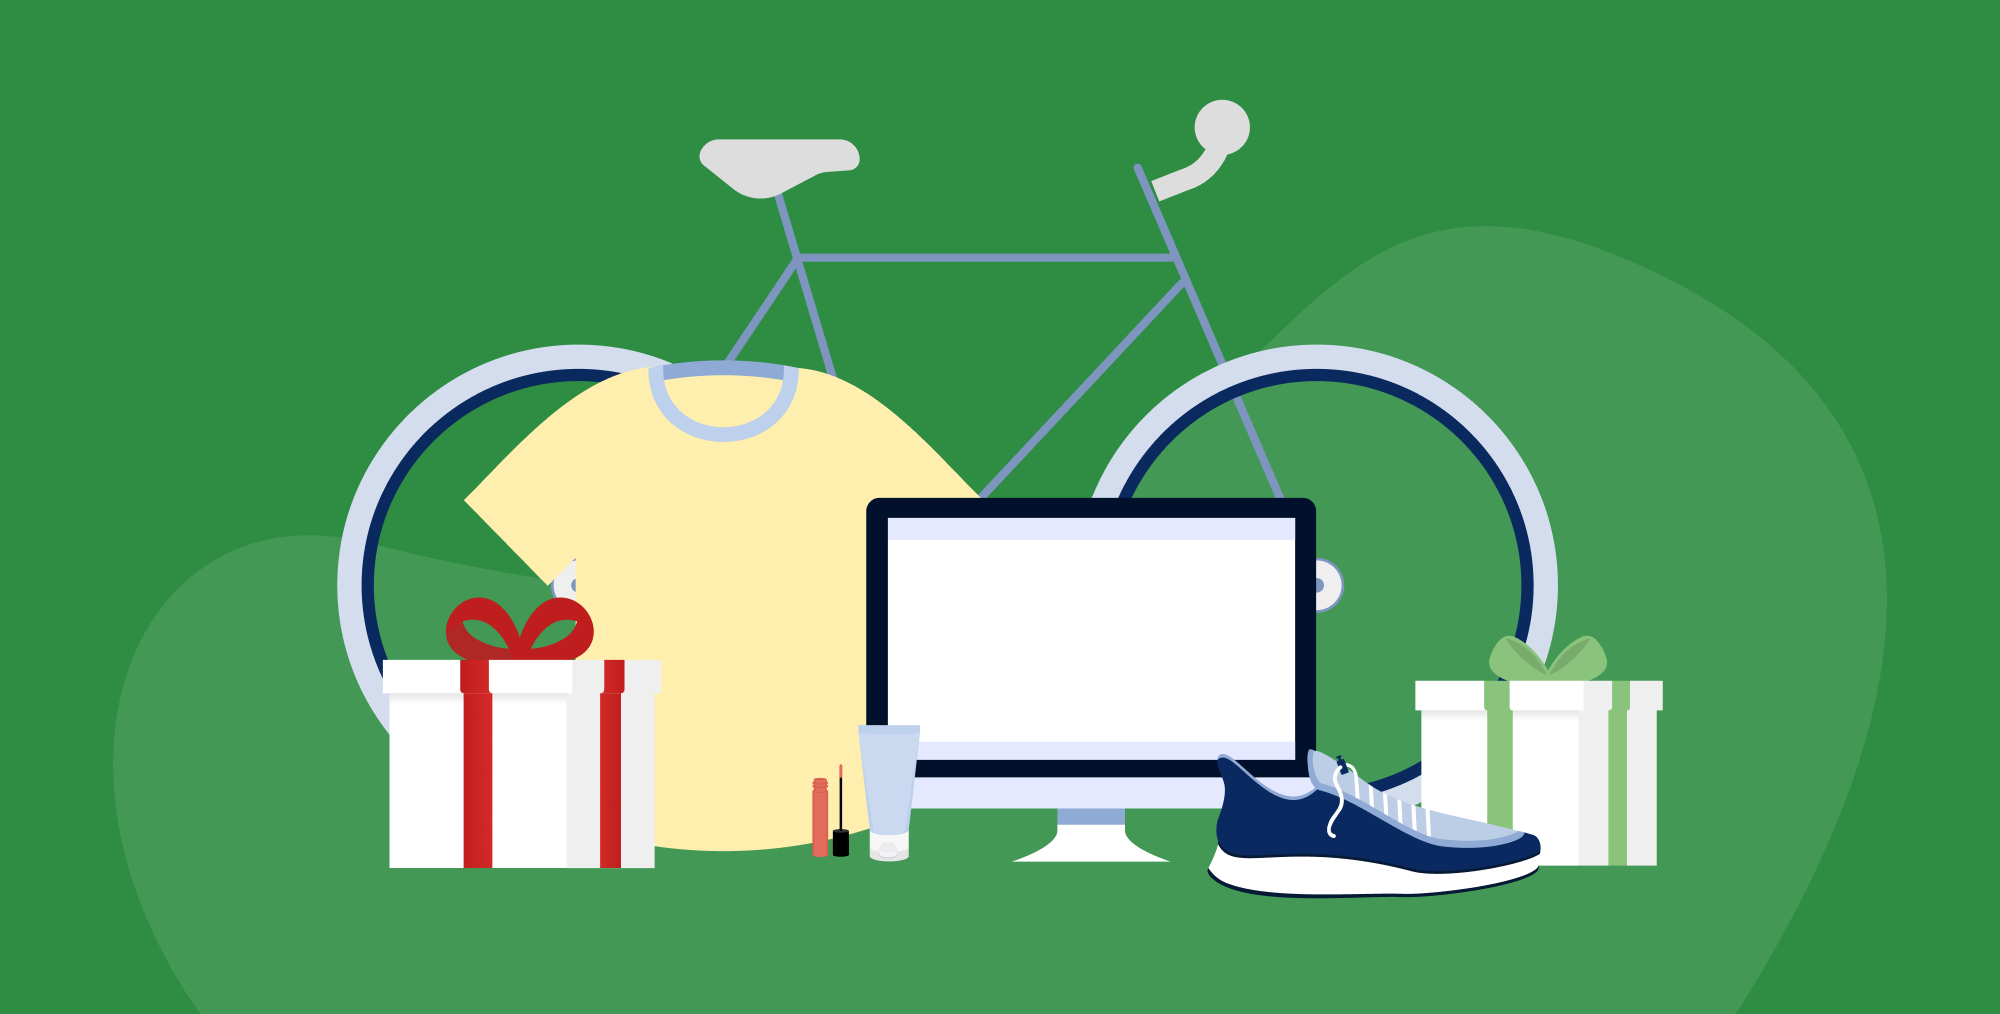 A green background with illustrated images of a bike, shirt, gift, computer, and sneakers to represent the top holiday products.